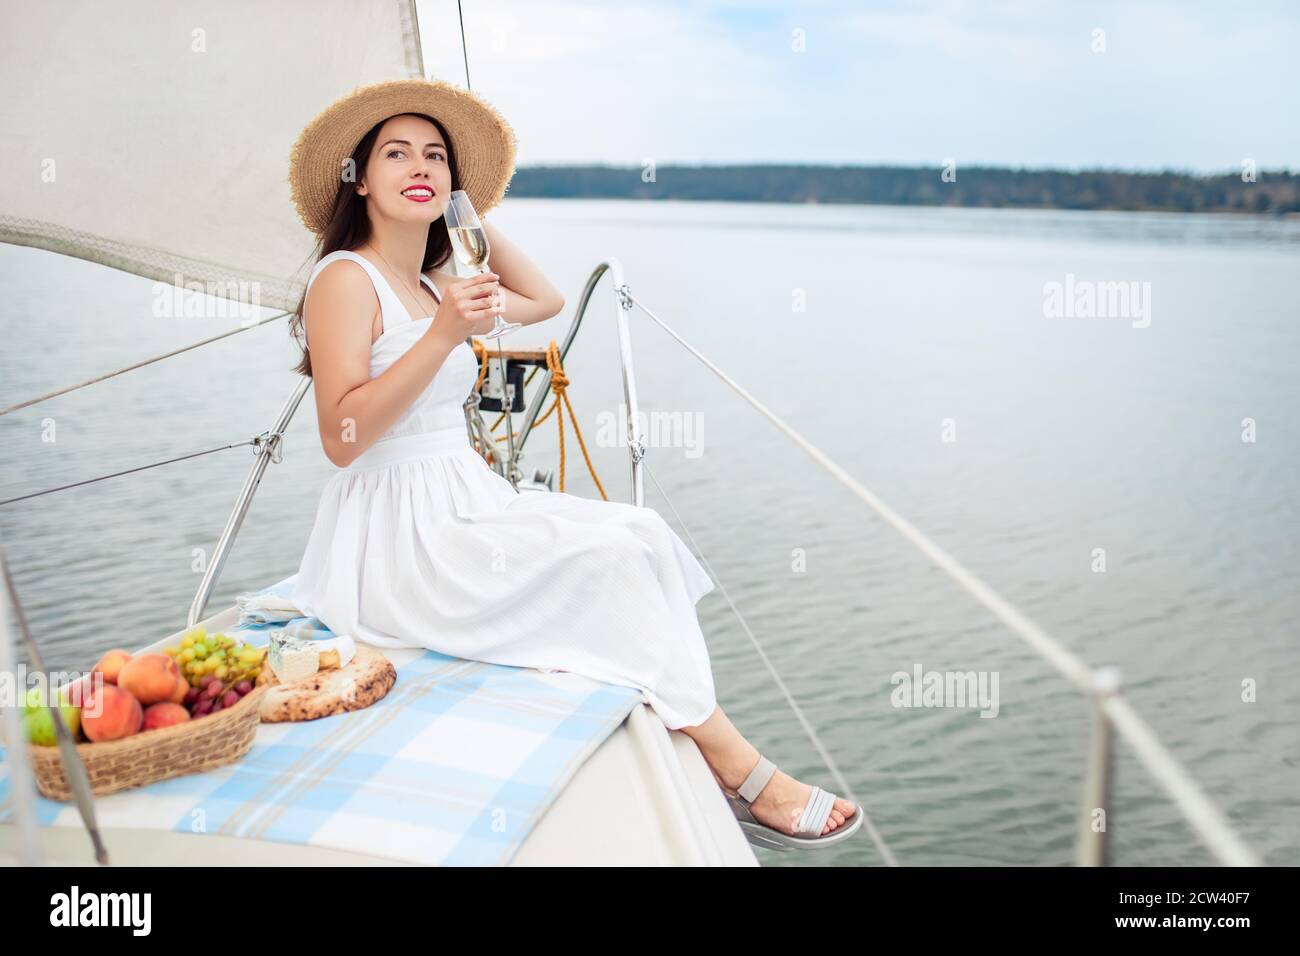 woman with glass of champagne Stock Photo